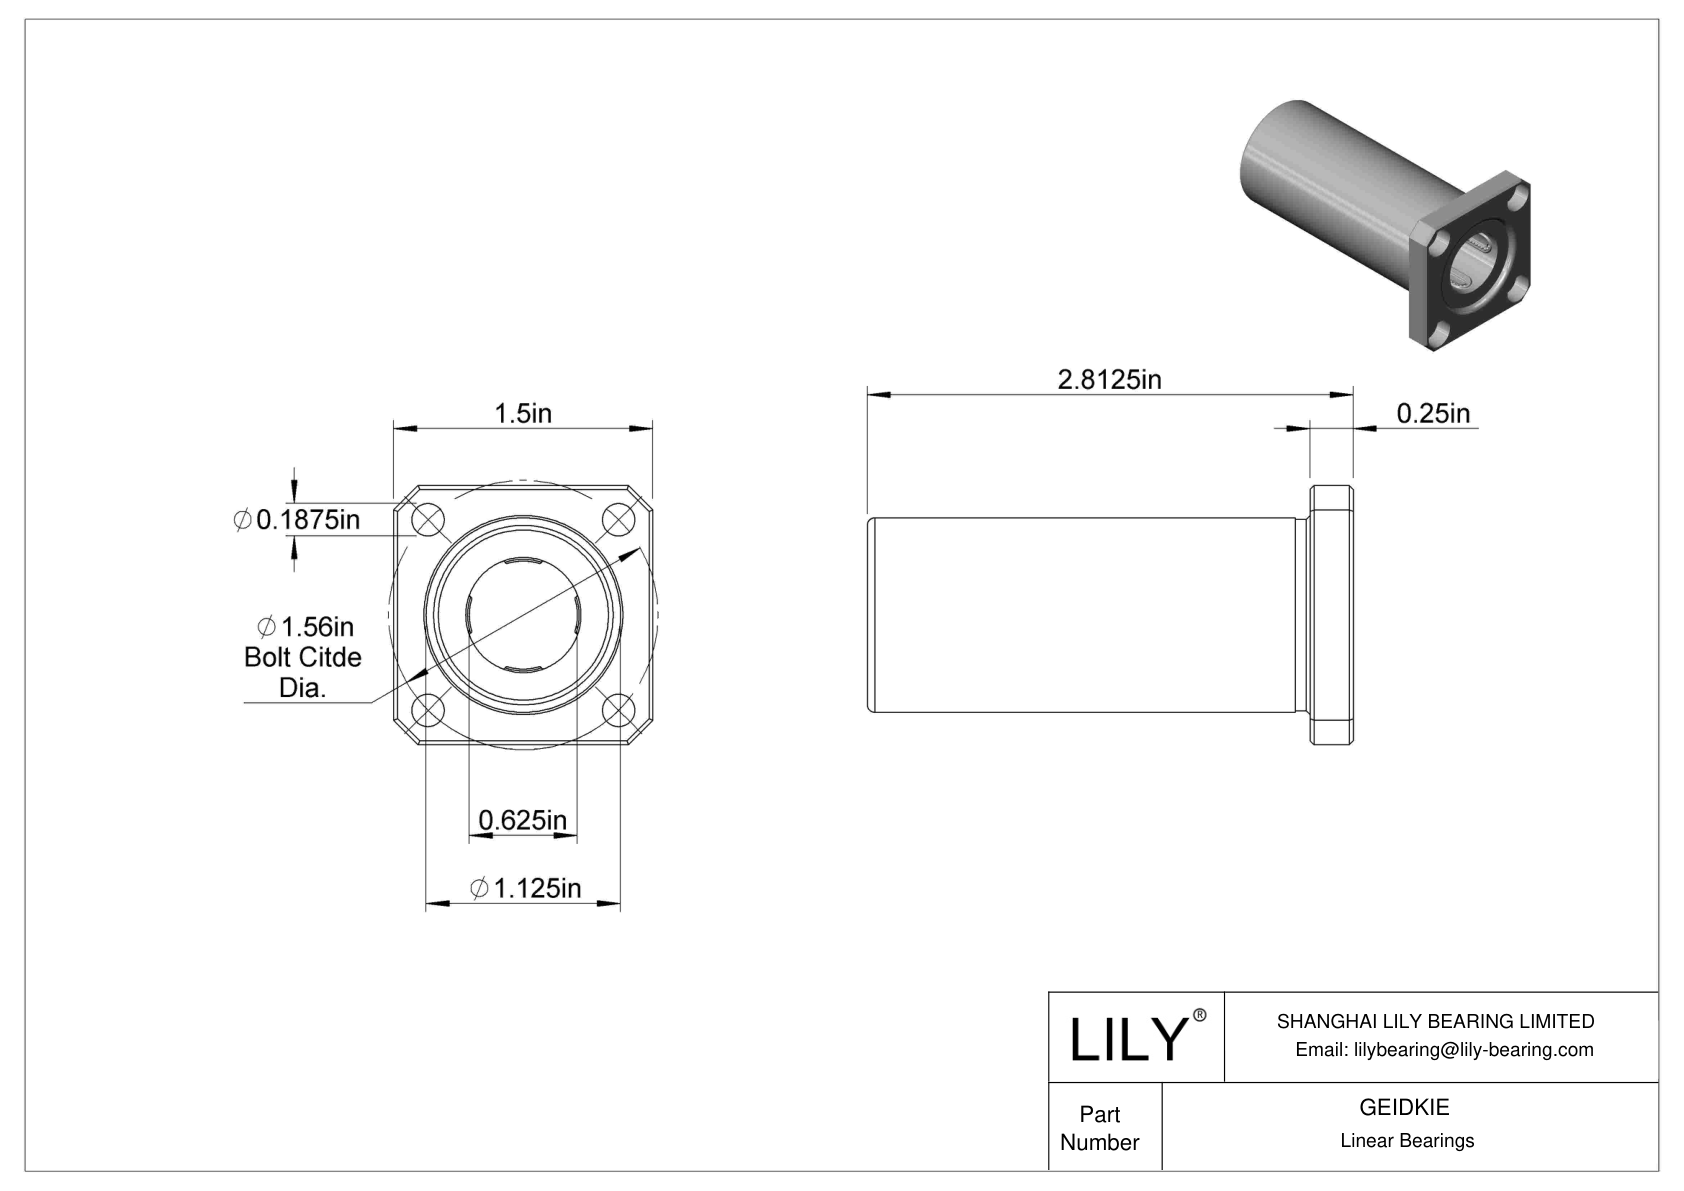 GEIDKIE Flange-Mounted Linear Ball Bearings cad drawing